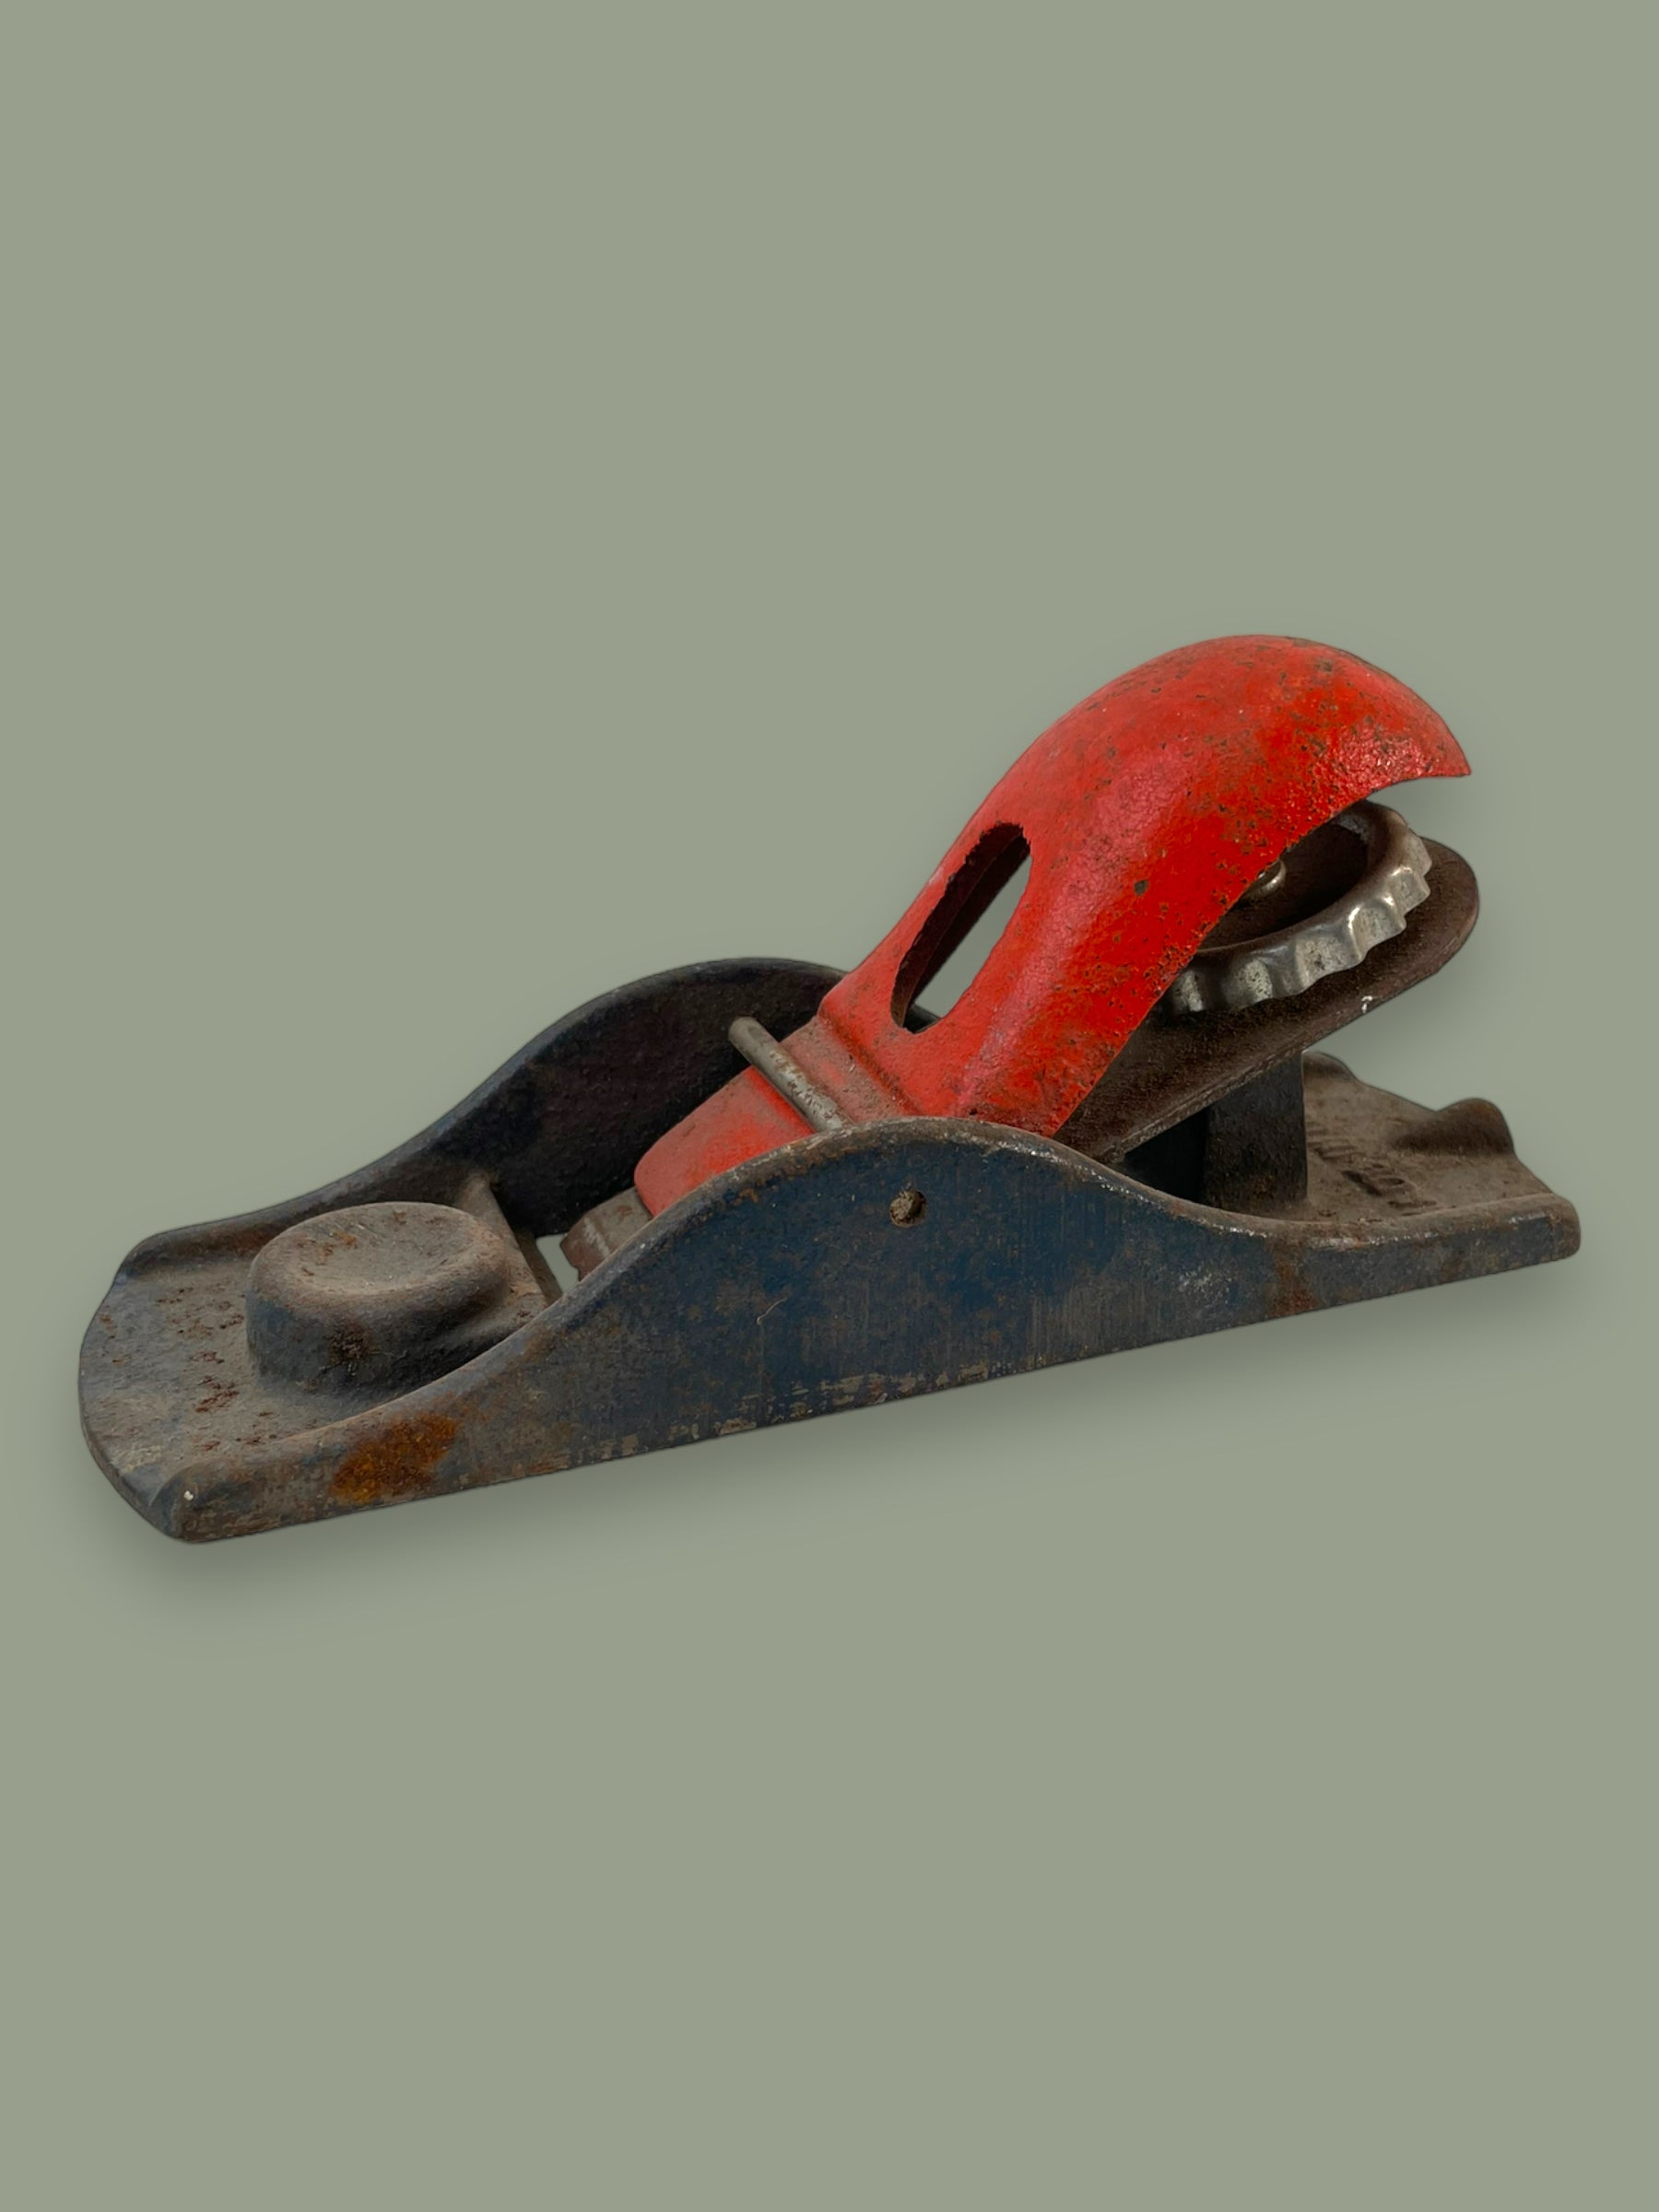 Vintage Wood Plane Made in USA